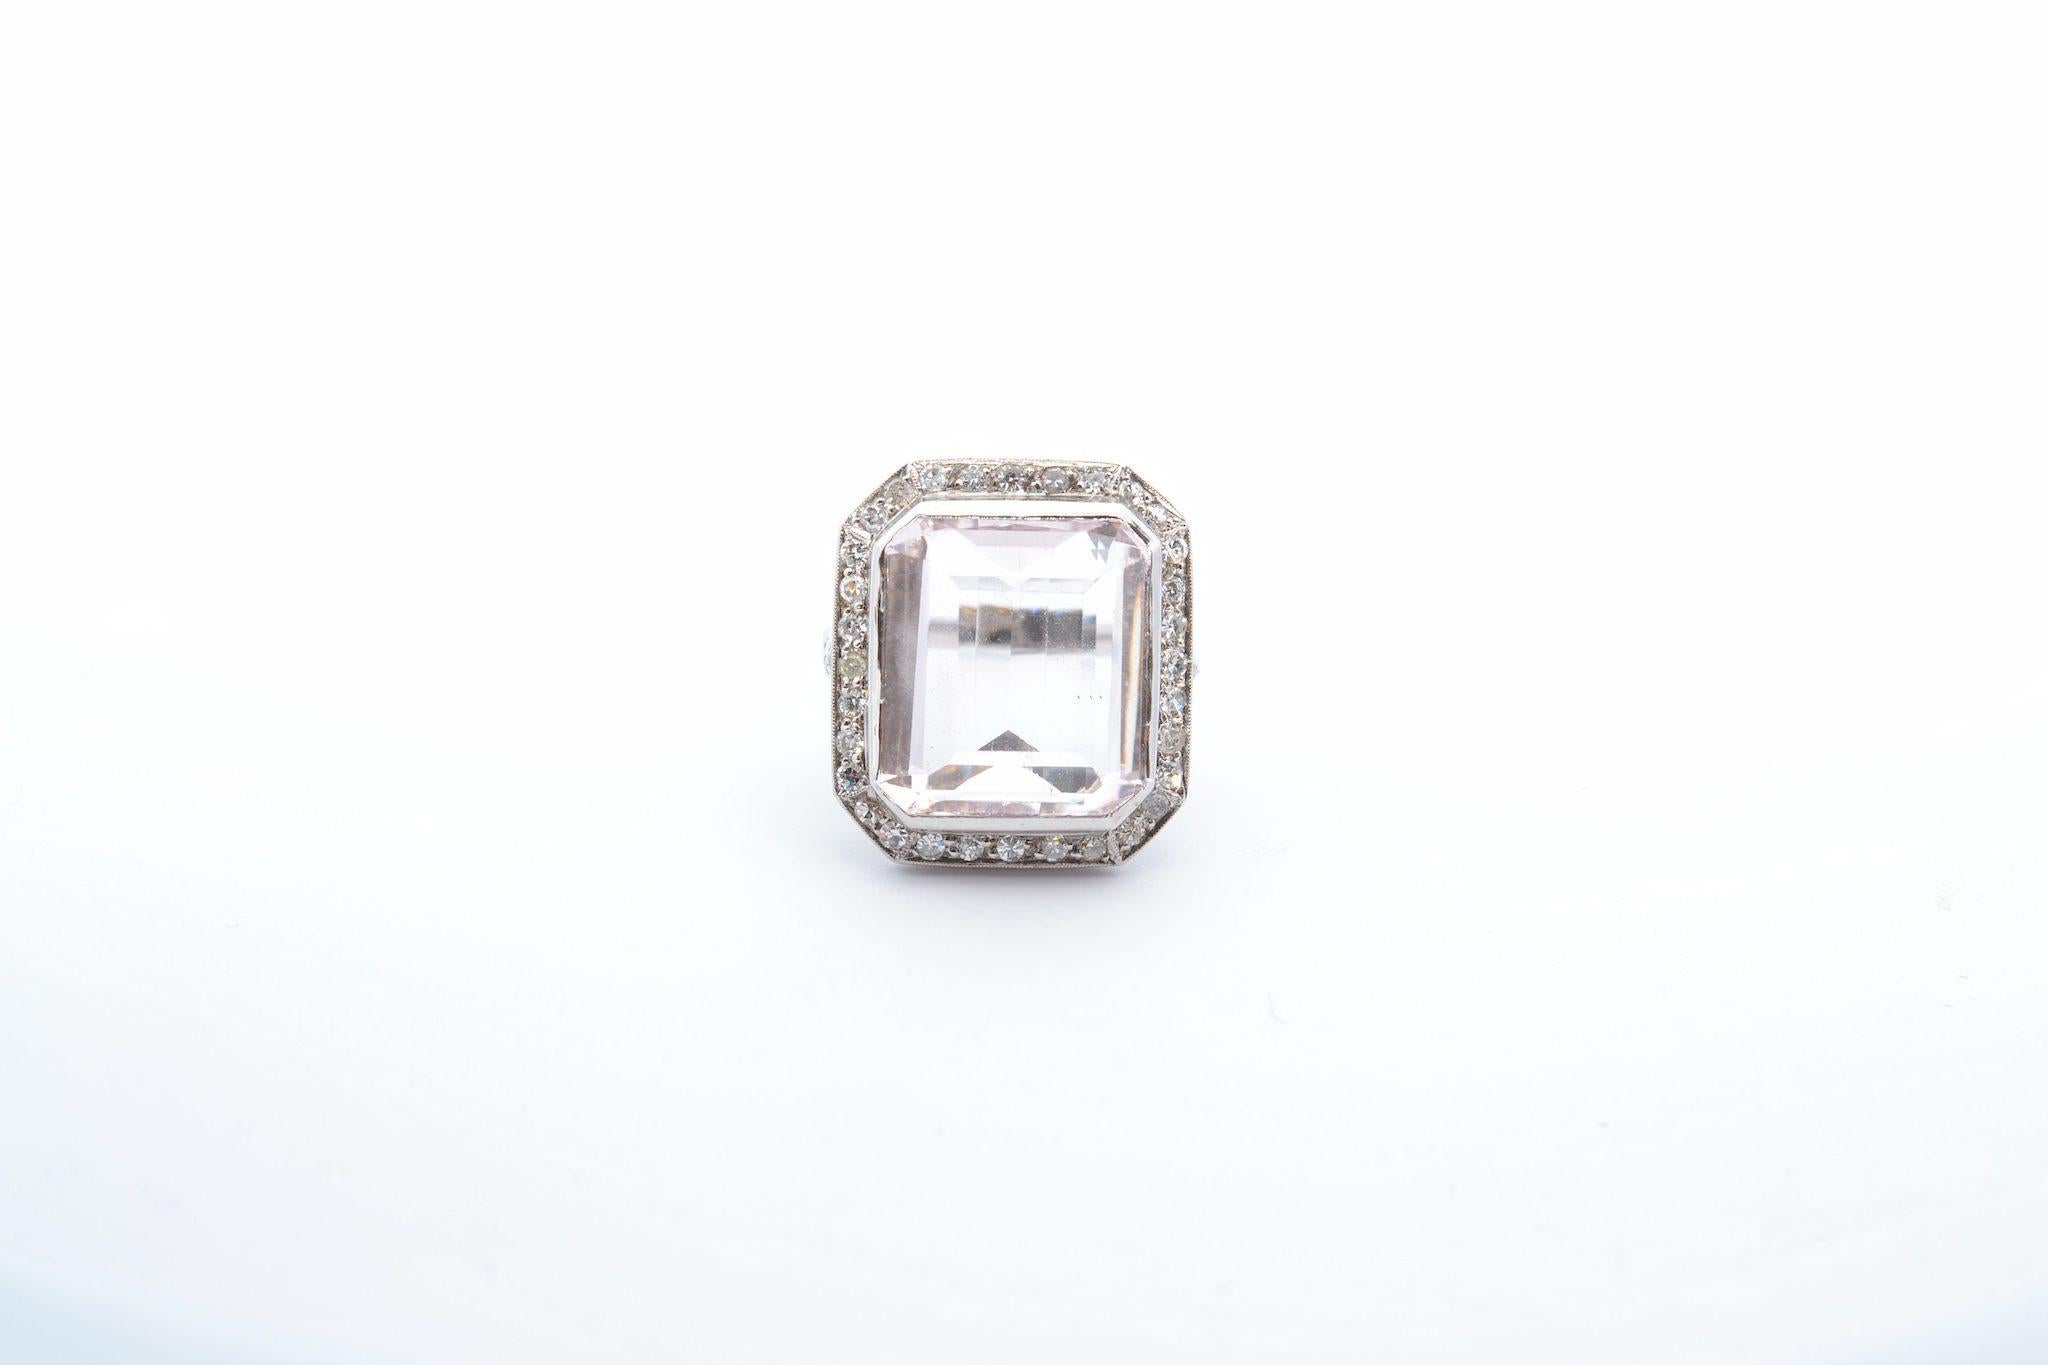 Stones: Natural morganite of 14.5 cts and 32 diamonds, weight: 0.75ct
Material: Platinum
Dimensions: 21mm x 19mm
Weight: 10.2g
Period: 1950
Size: 55 (free sizing)
Certificate
Ref. : 25085